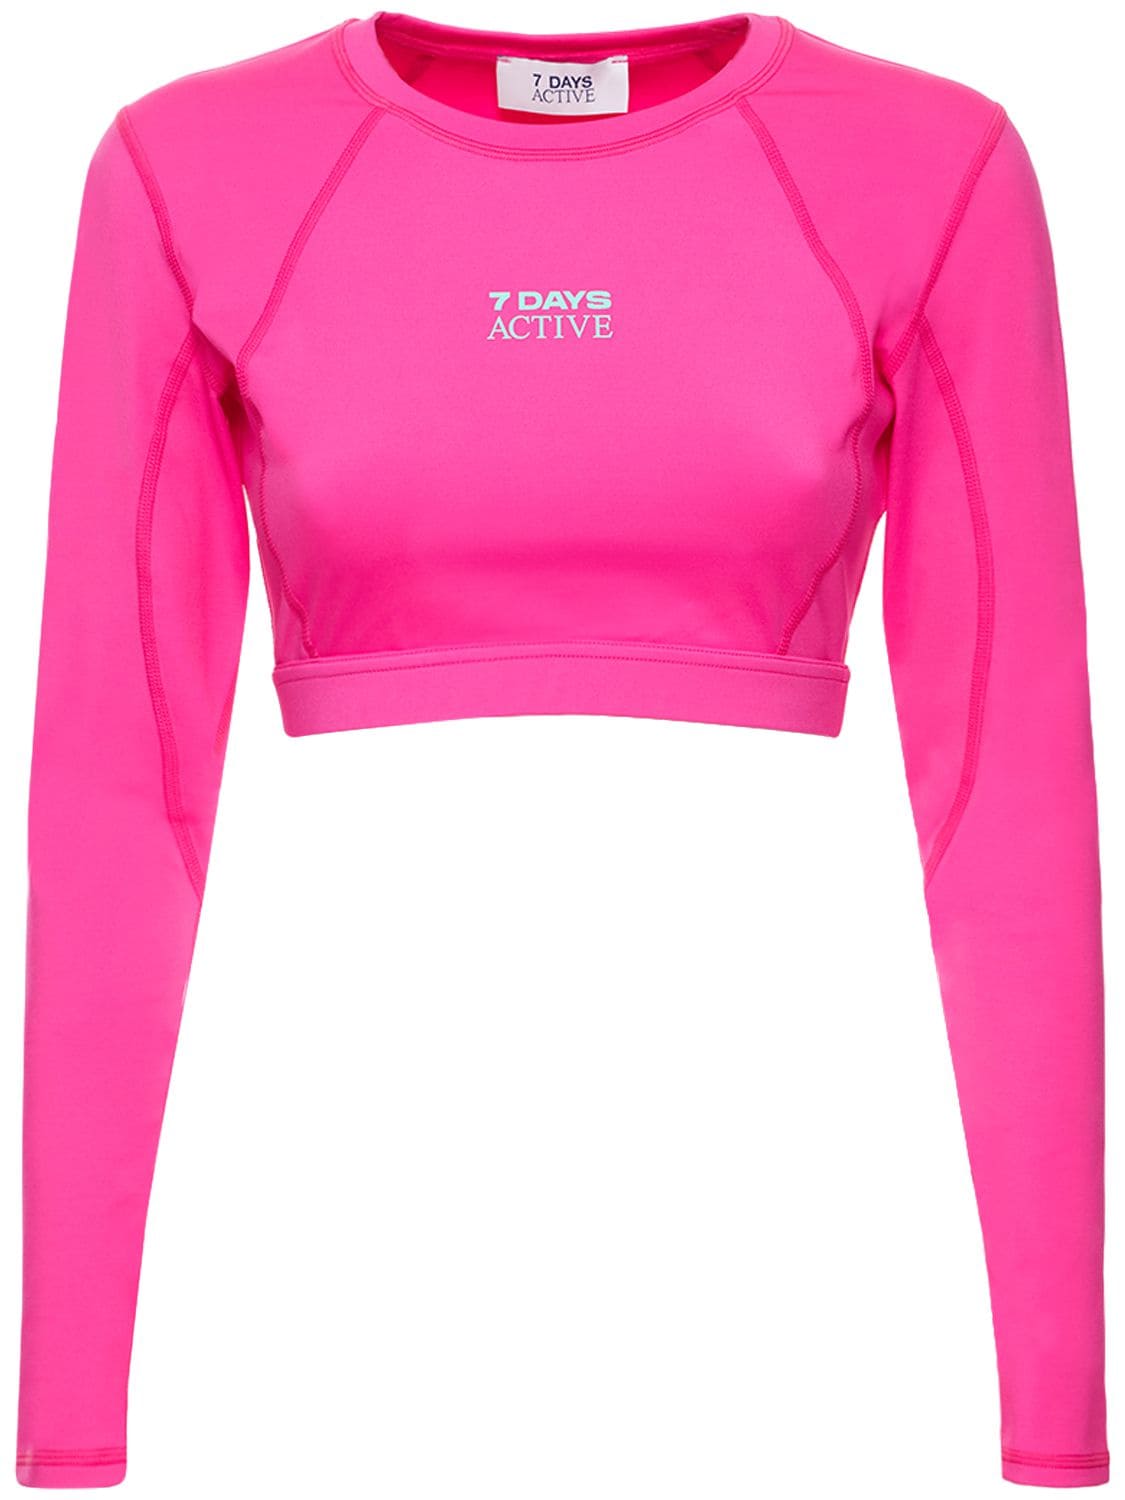 7 DAYS ACTIVE CROPPED LONG SLEEVE TOP